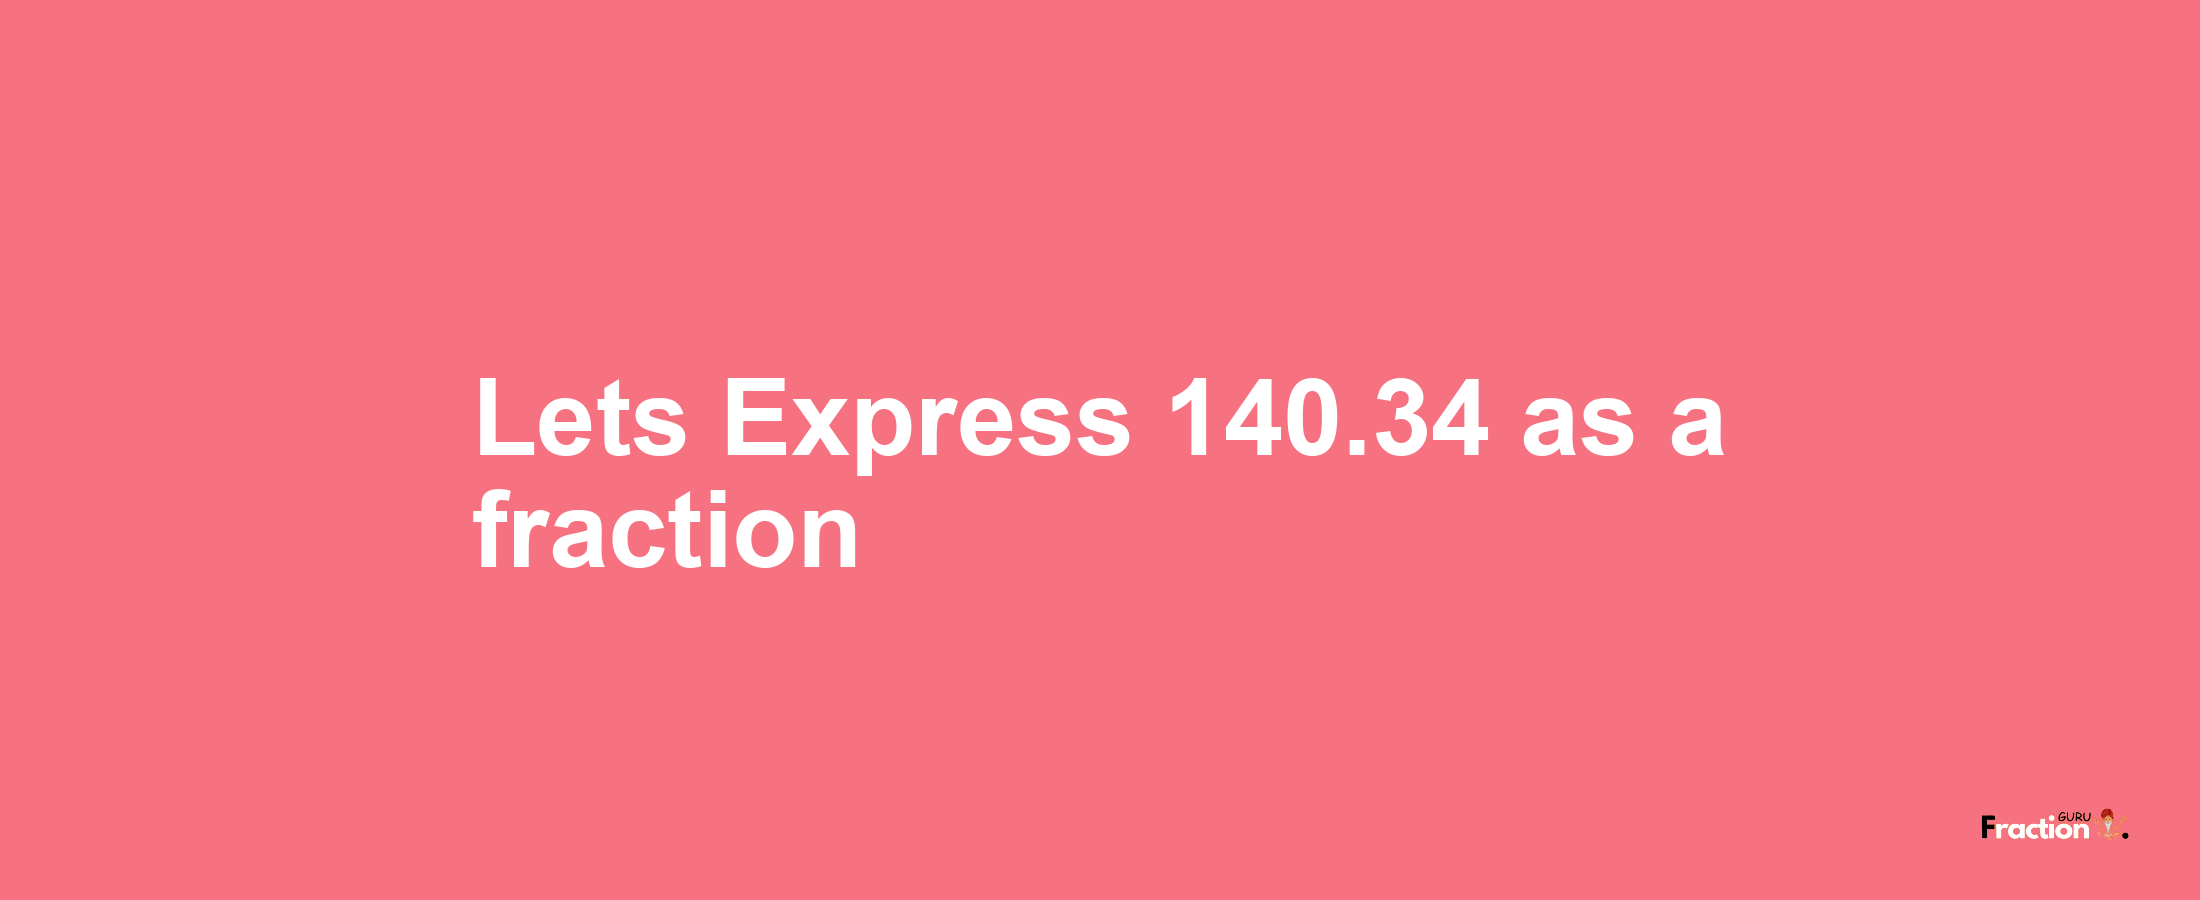 Lets Express 140.34 as afraction